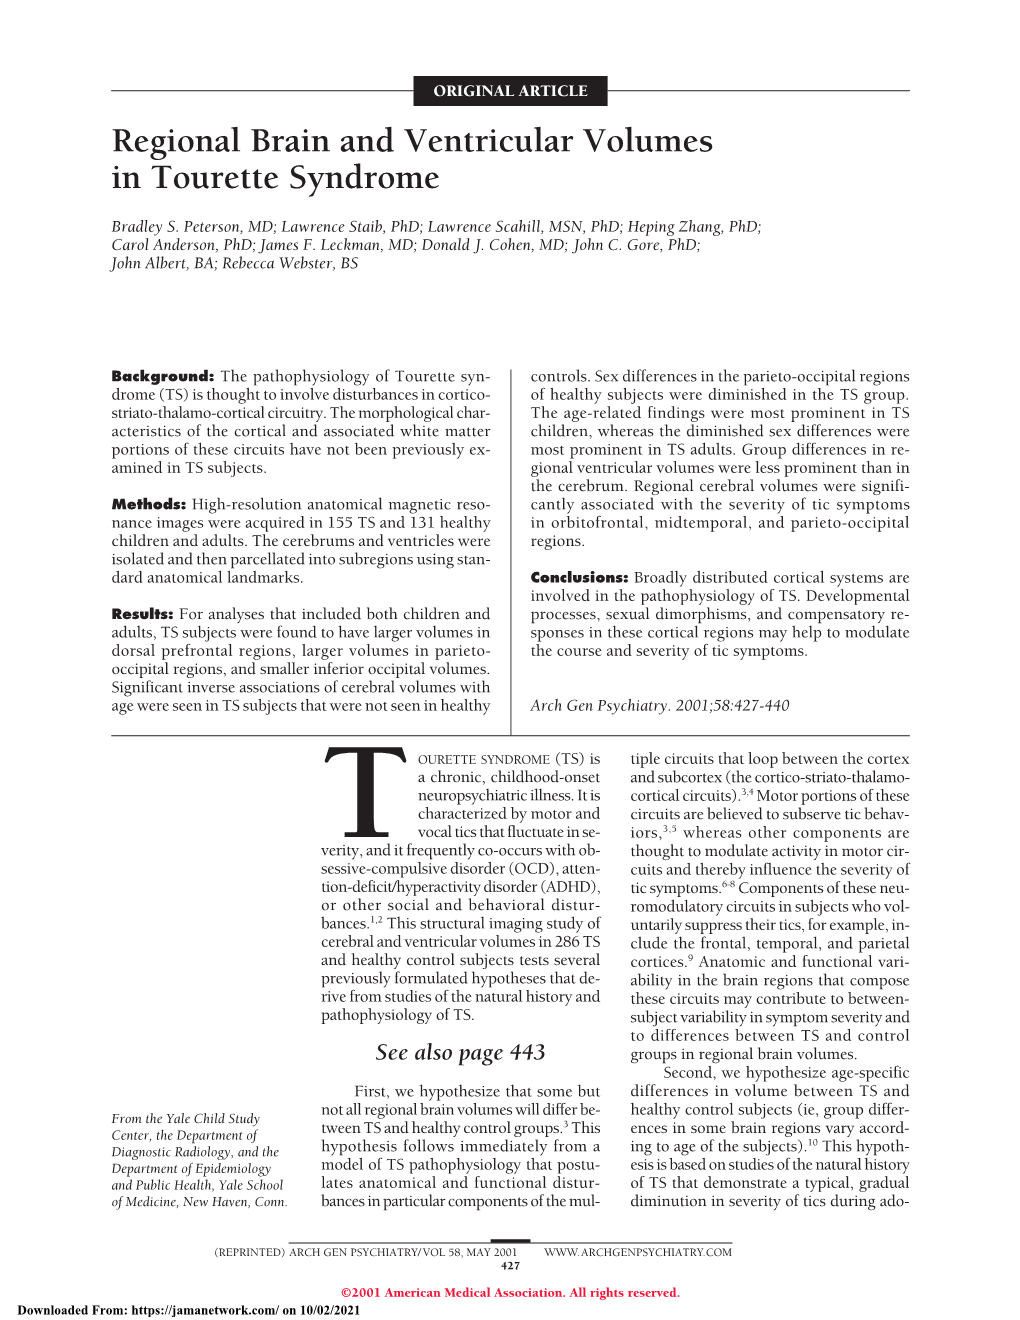 Regional Brain and Ventricular Volumes in Tourette Syndrome